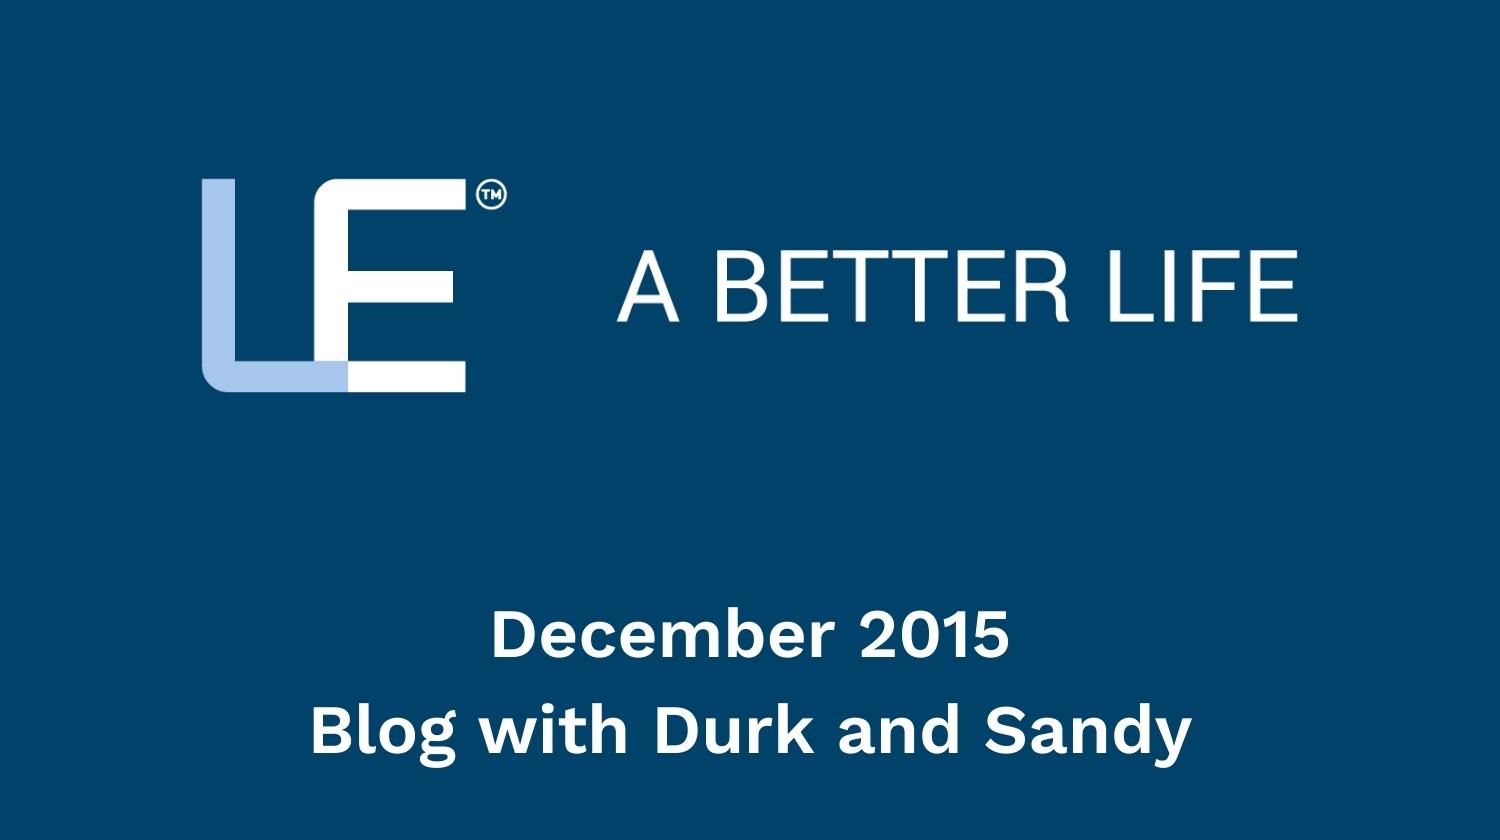 December 2015 Blog with Durk and Sandy